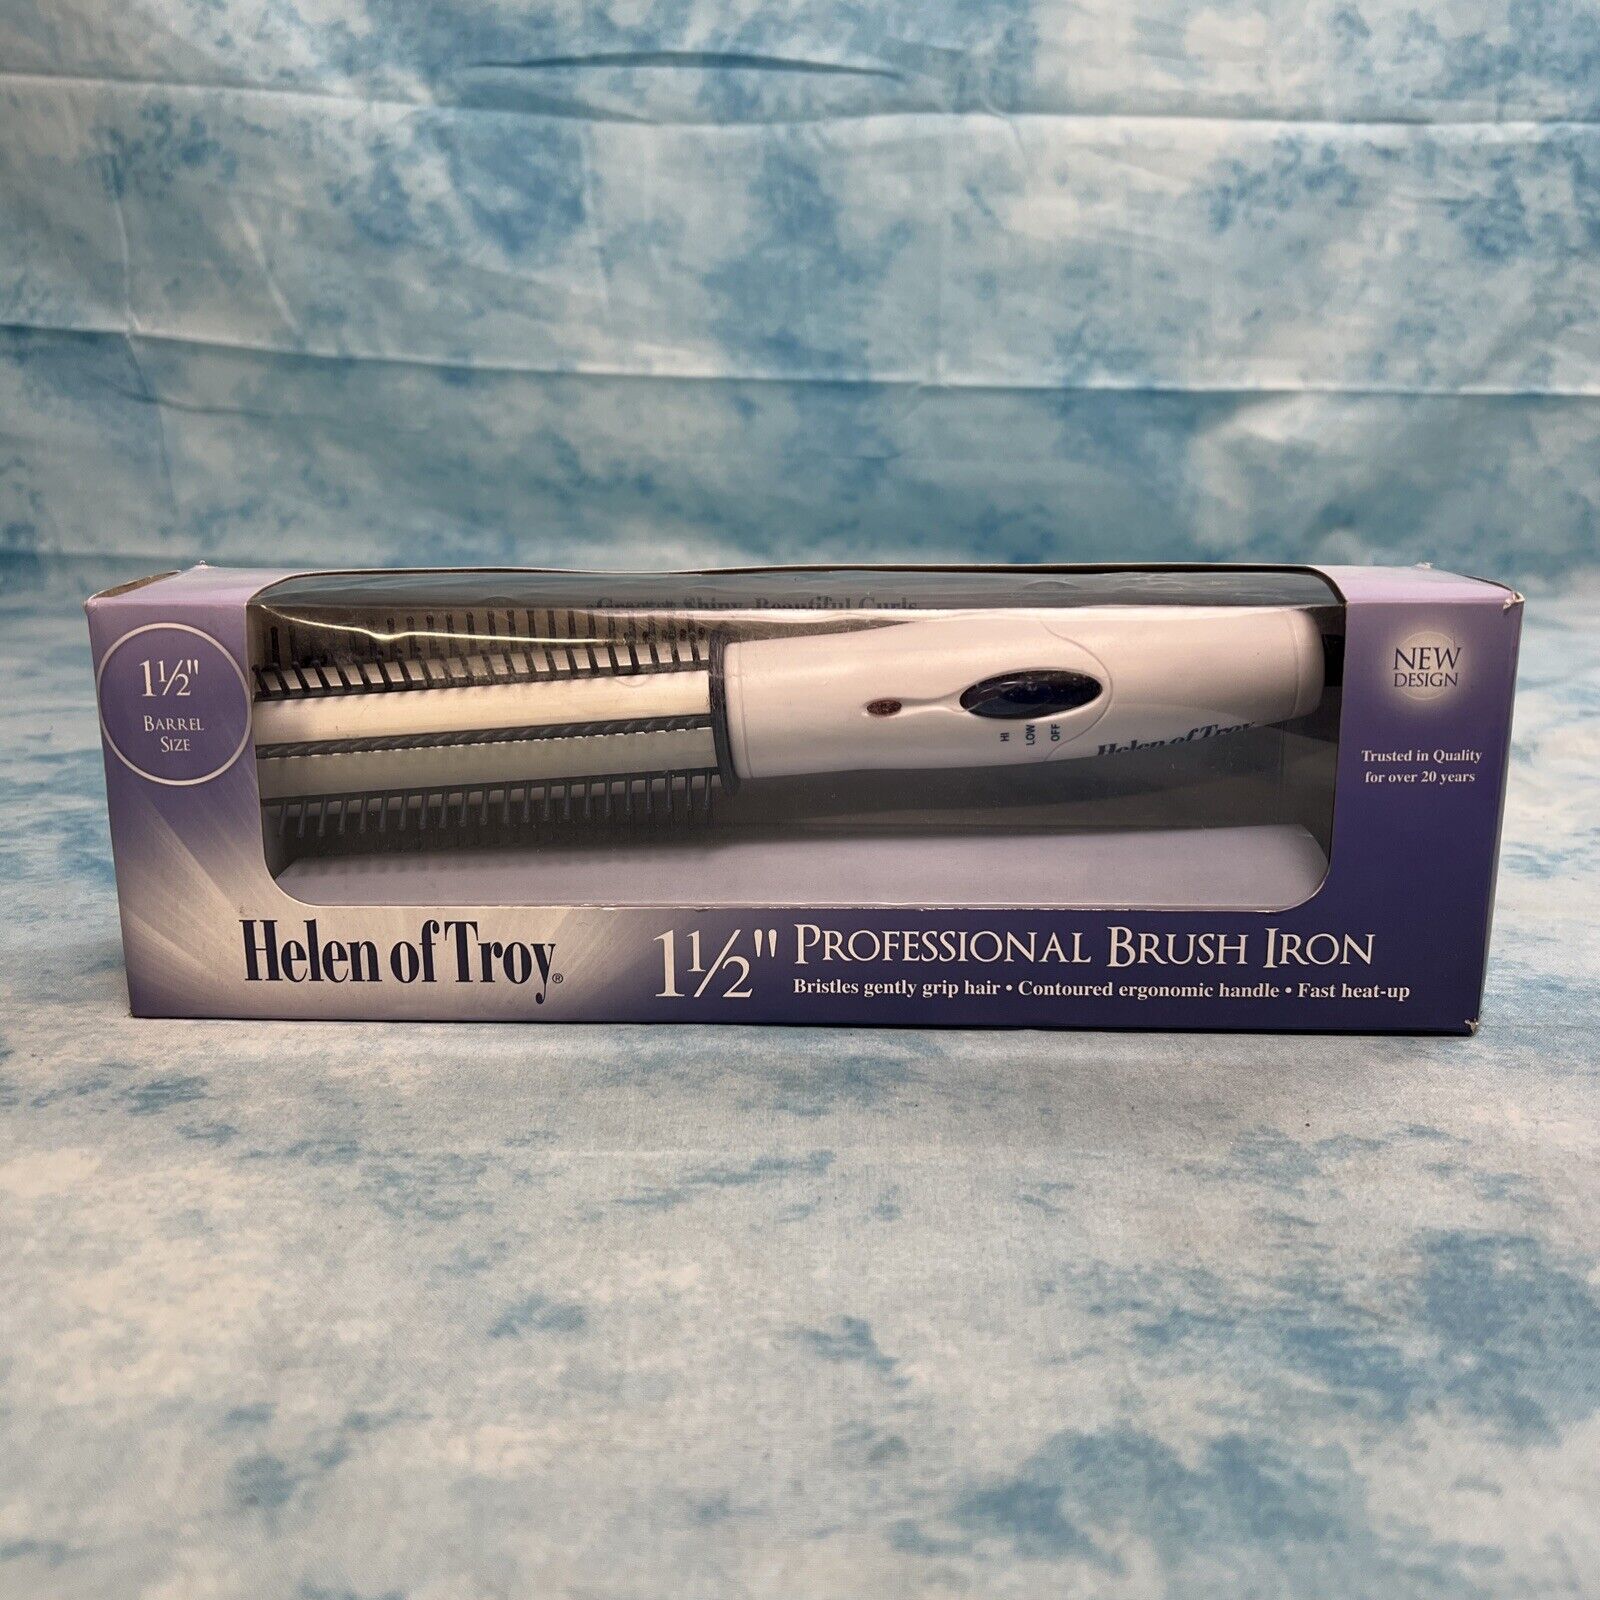 Helen of Troy 1514 Professional Brush Iron (1 1/2 in)